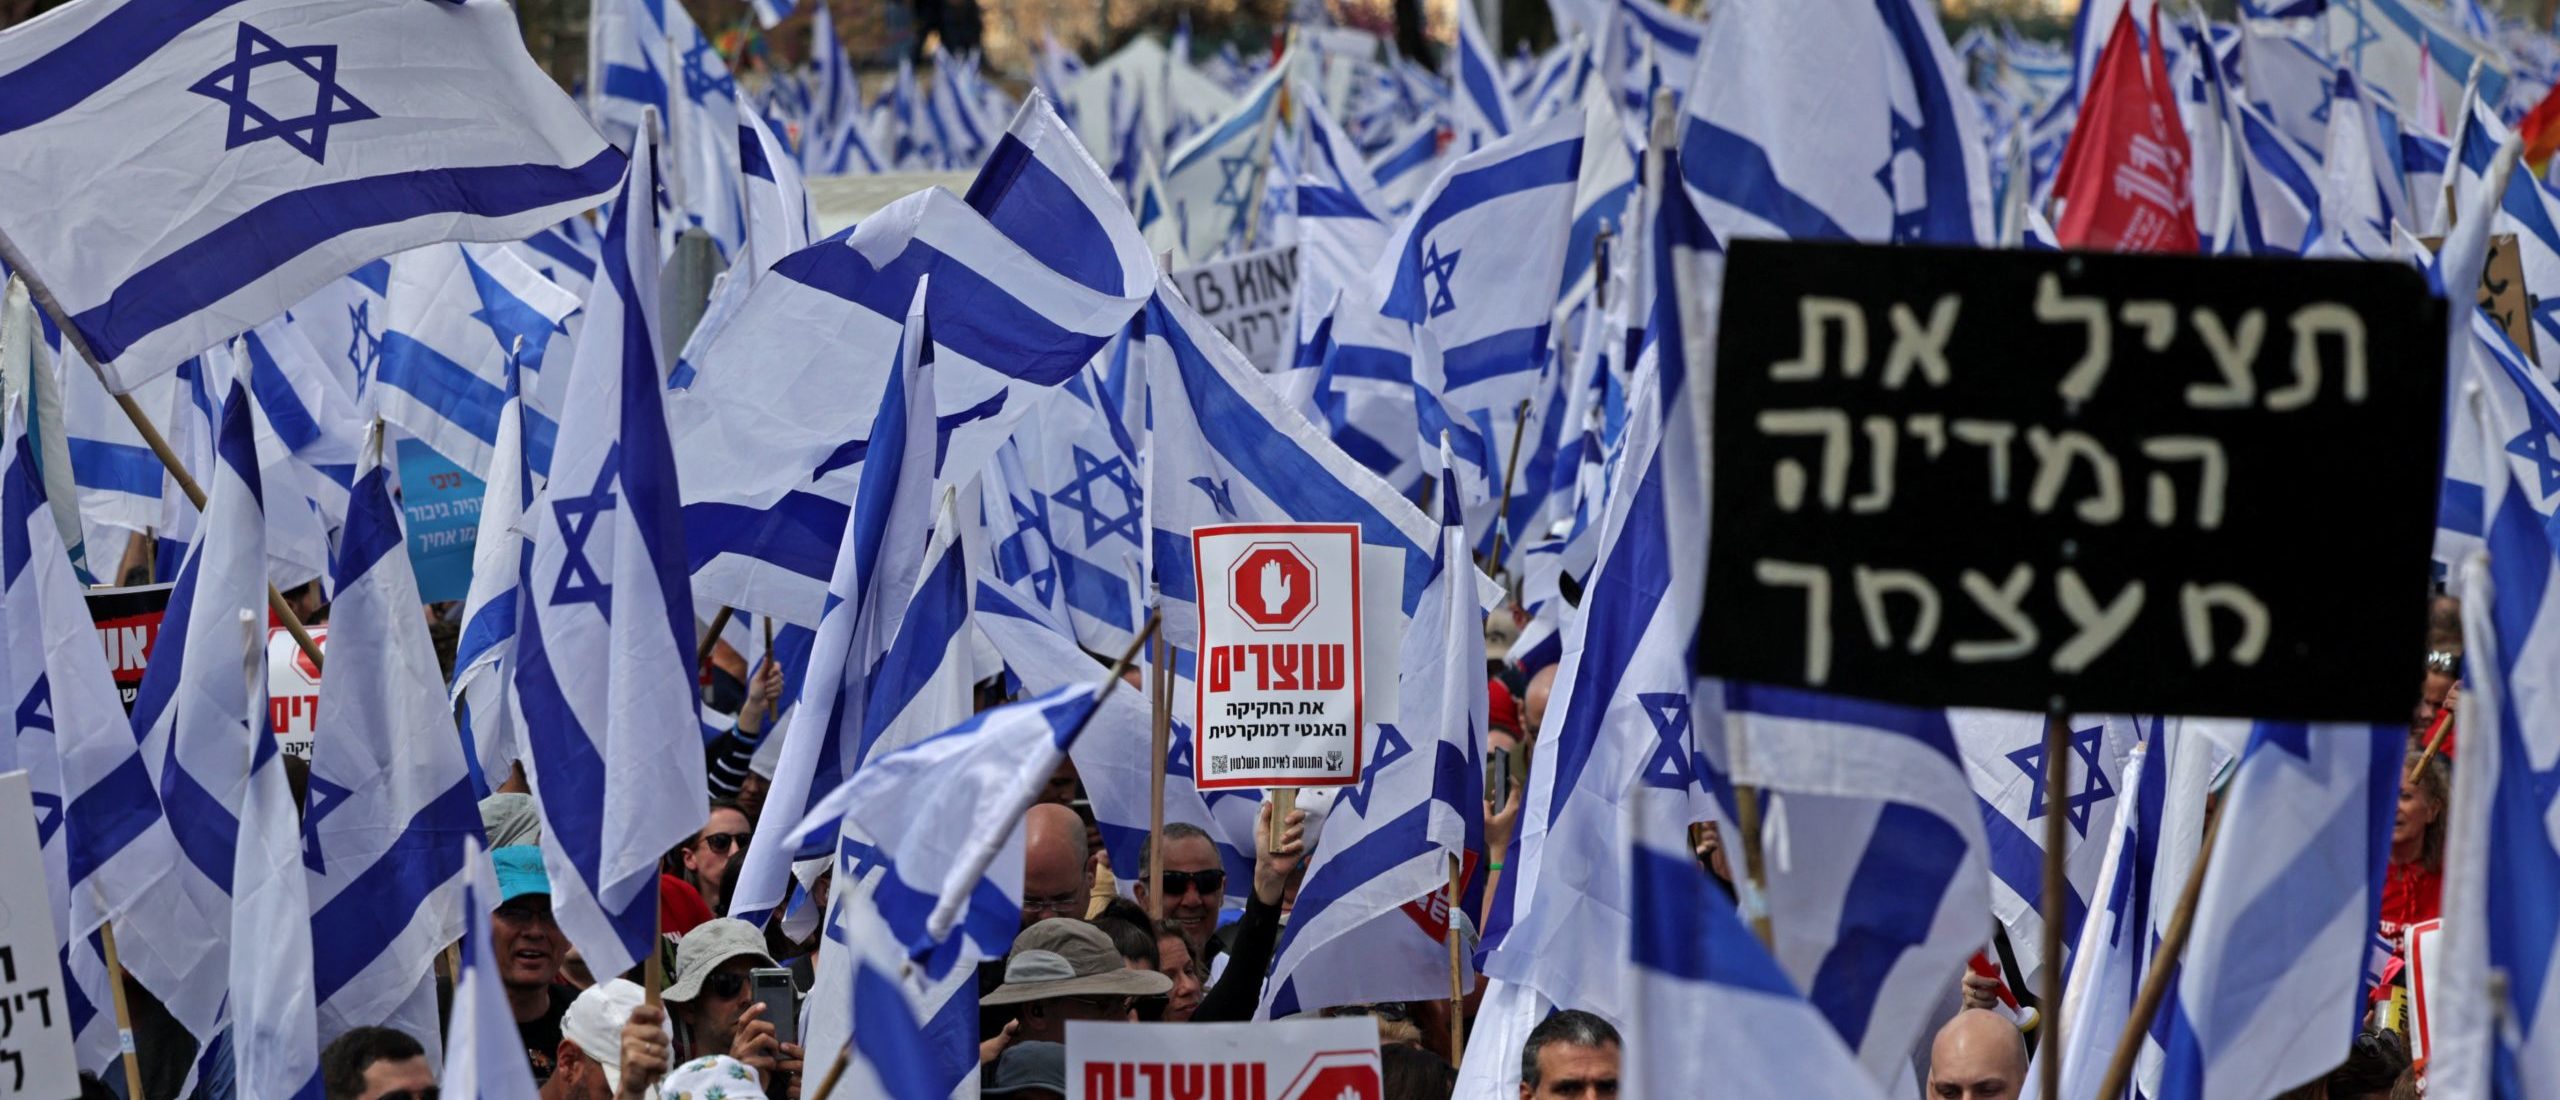 Protesters gather with placards and national flags outside Israel's parliament in Jerusalem amid ongoing demonstrations and calls for a general strike against the hard-right government's controversial push to overhaul the justice system, on March 27, 2023. (Photo by HAZEM BADER/AFP via Getty Images)